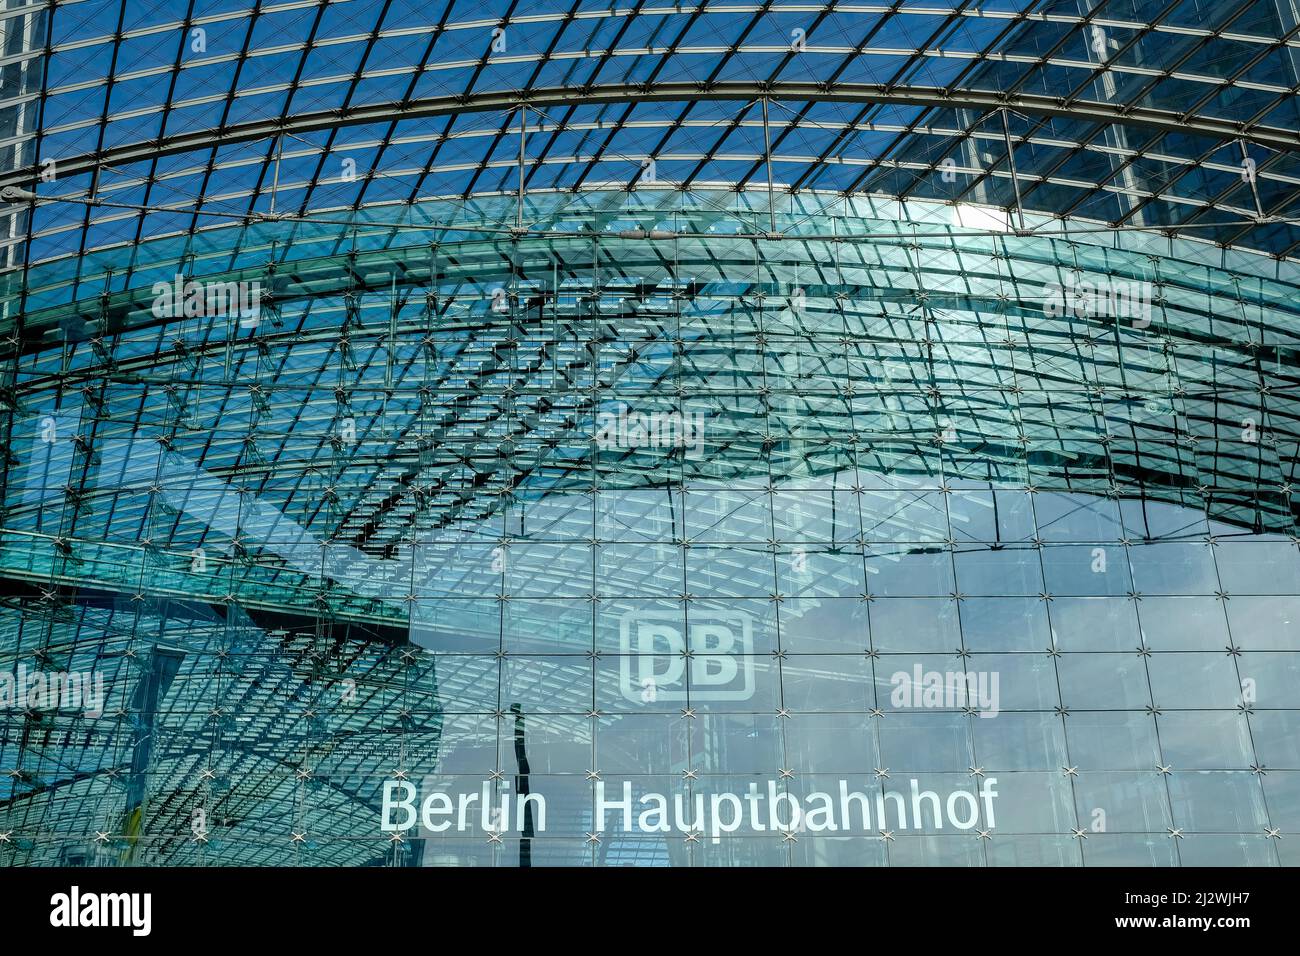 Berlin, Germany. Facade of Berlin's Hbf / Hauptbahnhof. Curently the Railway Station is center point in recieving Ukrainian war victims and refugees, Stock Photo